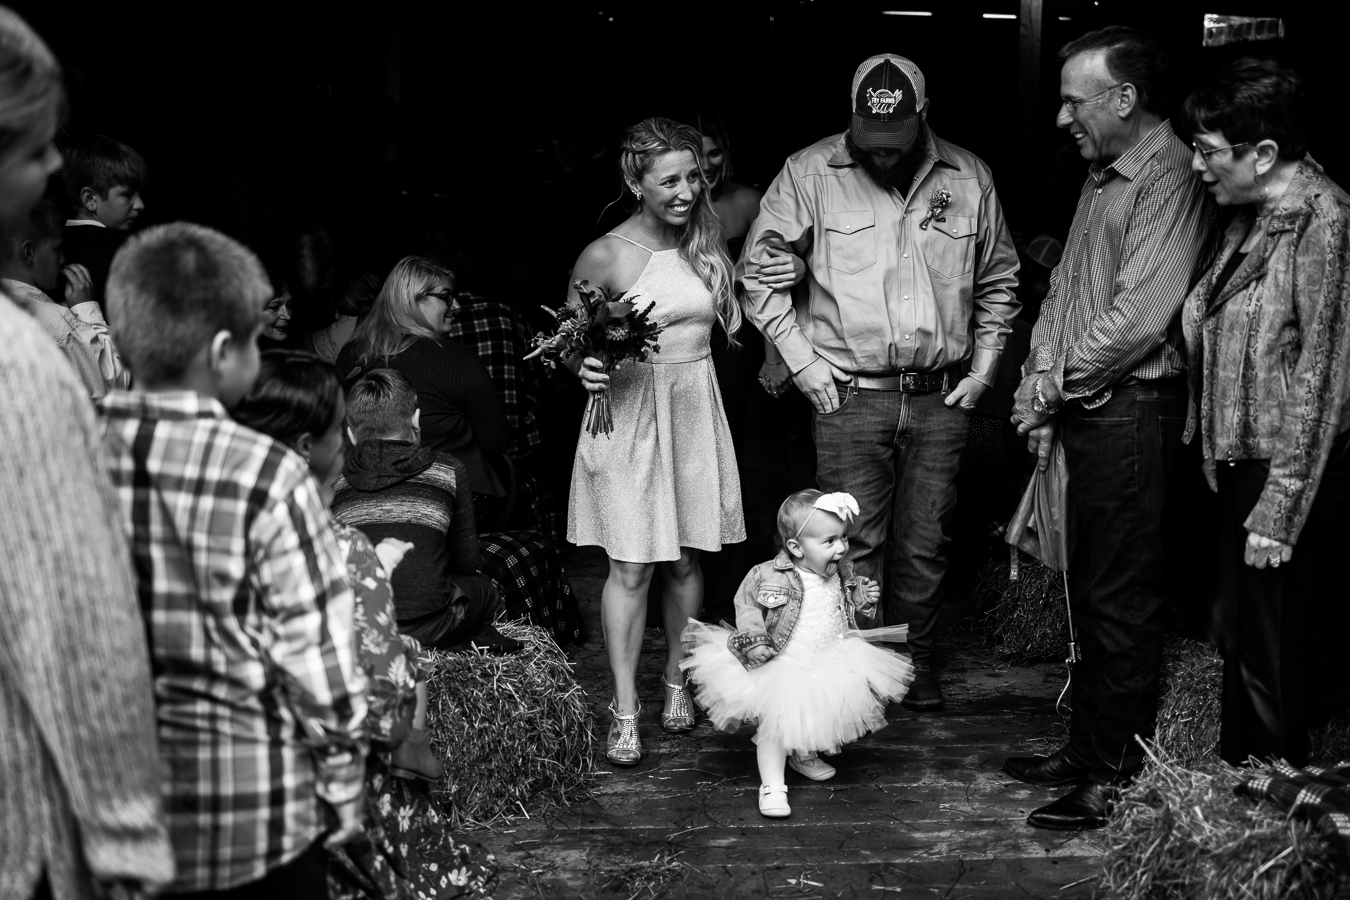 best pa wedding photographer, lisa rhinehart, captures this candid moment as the wedding party exits the barn and the flower girl runs out of the barn in her puffy tutu at the end of this country wedding ceremony 